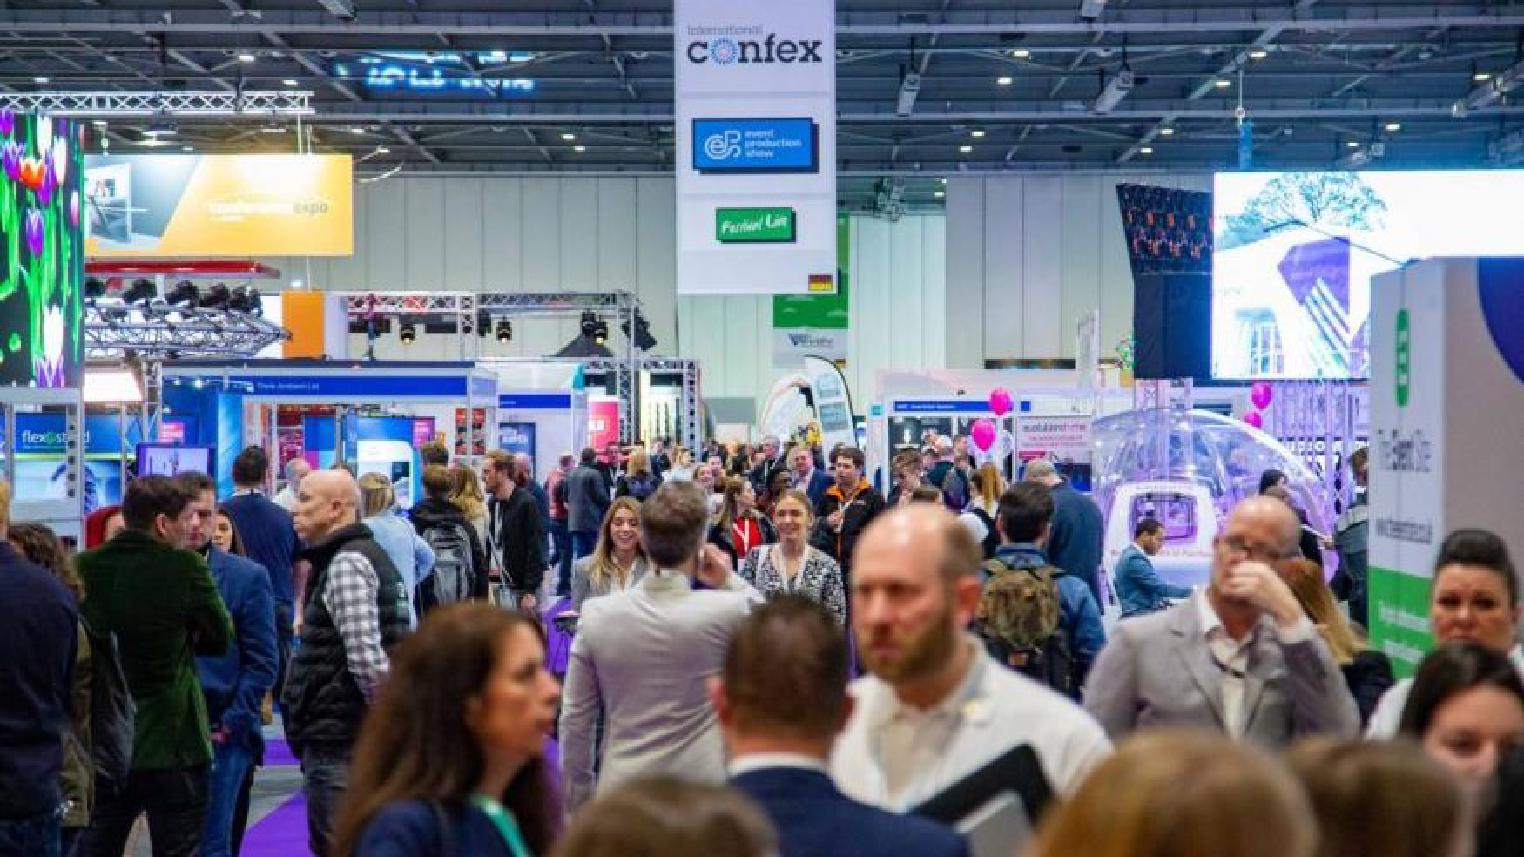 Crowd Connected to provide visitor analytics for Confex. 2021